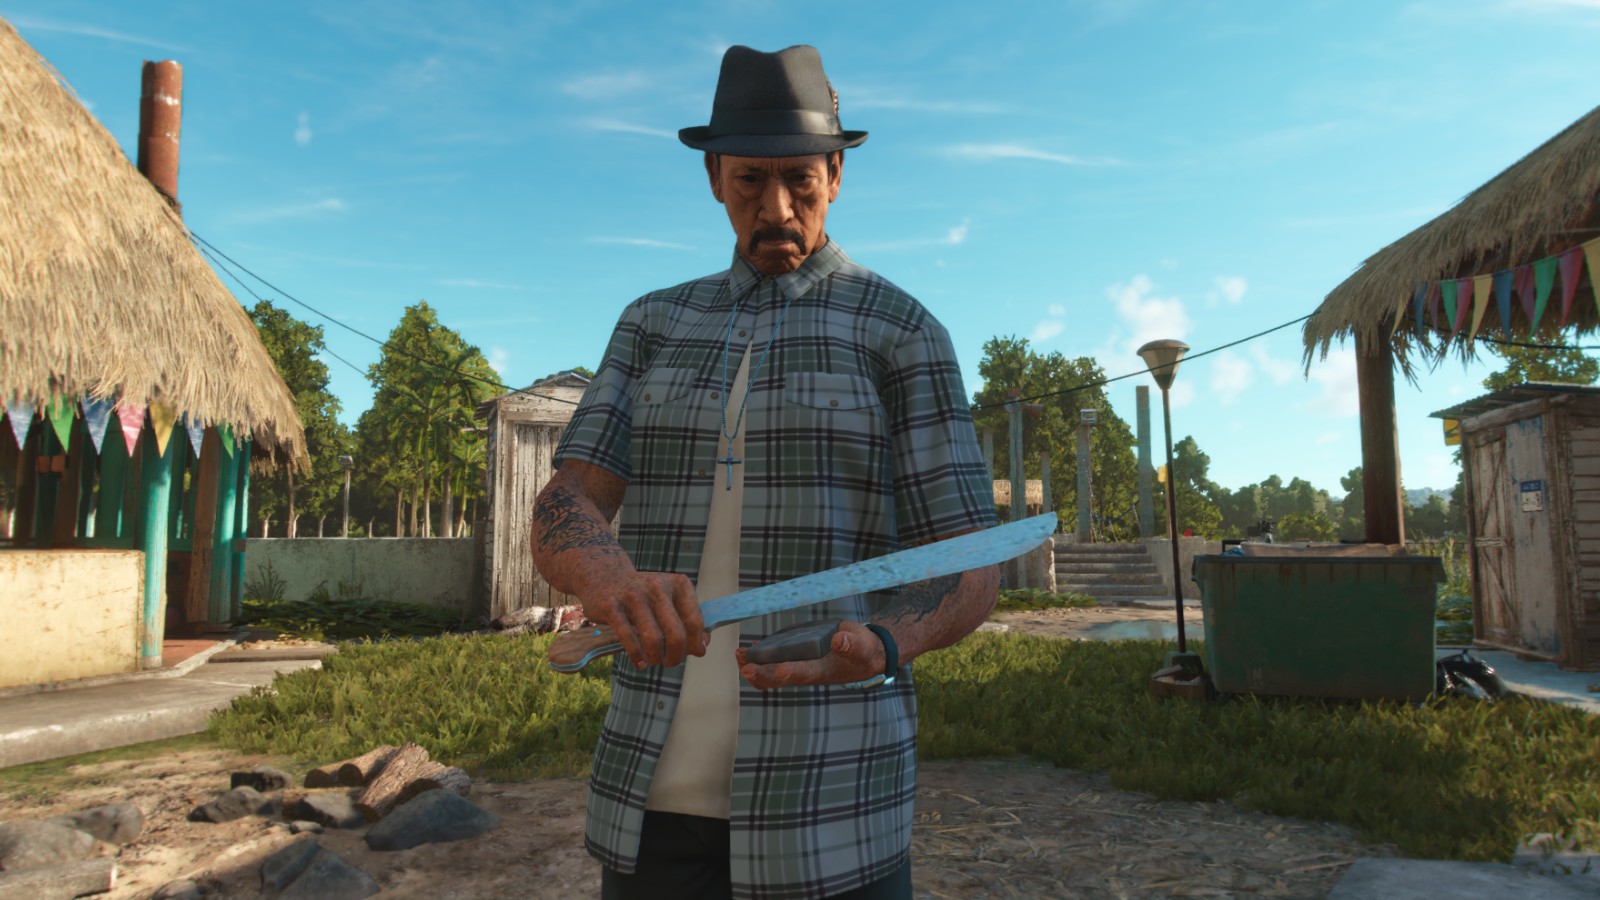 Far Cry 6 DLC Announced Featuring Stranger Things, Rambo, and Danny Trejo